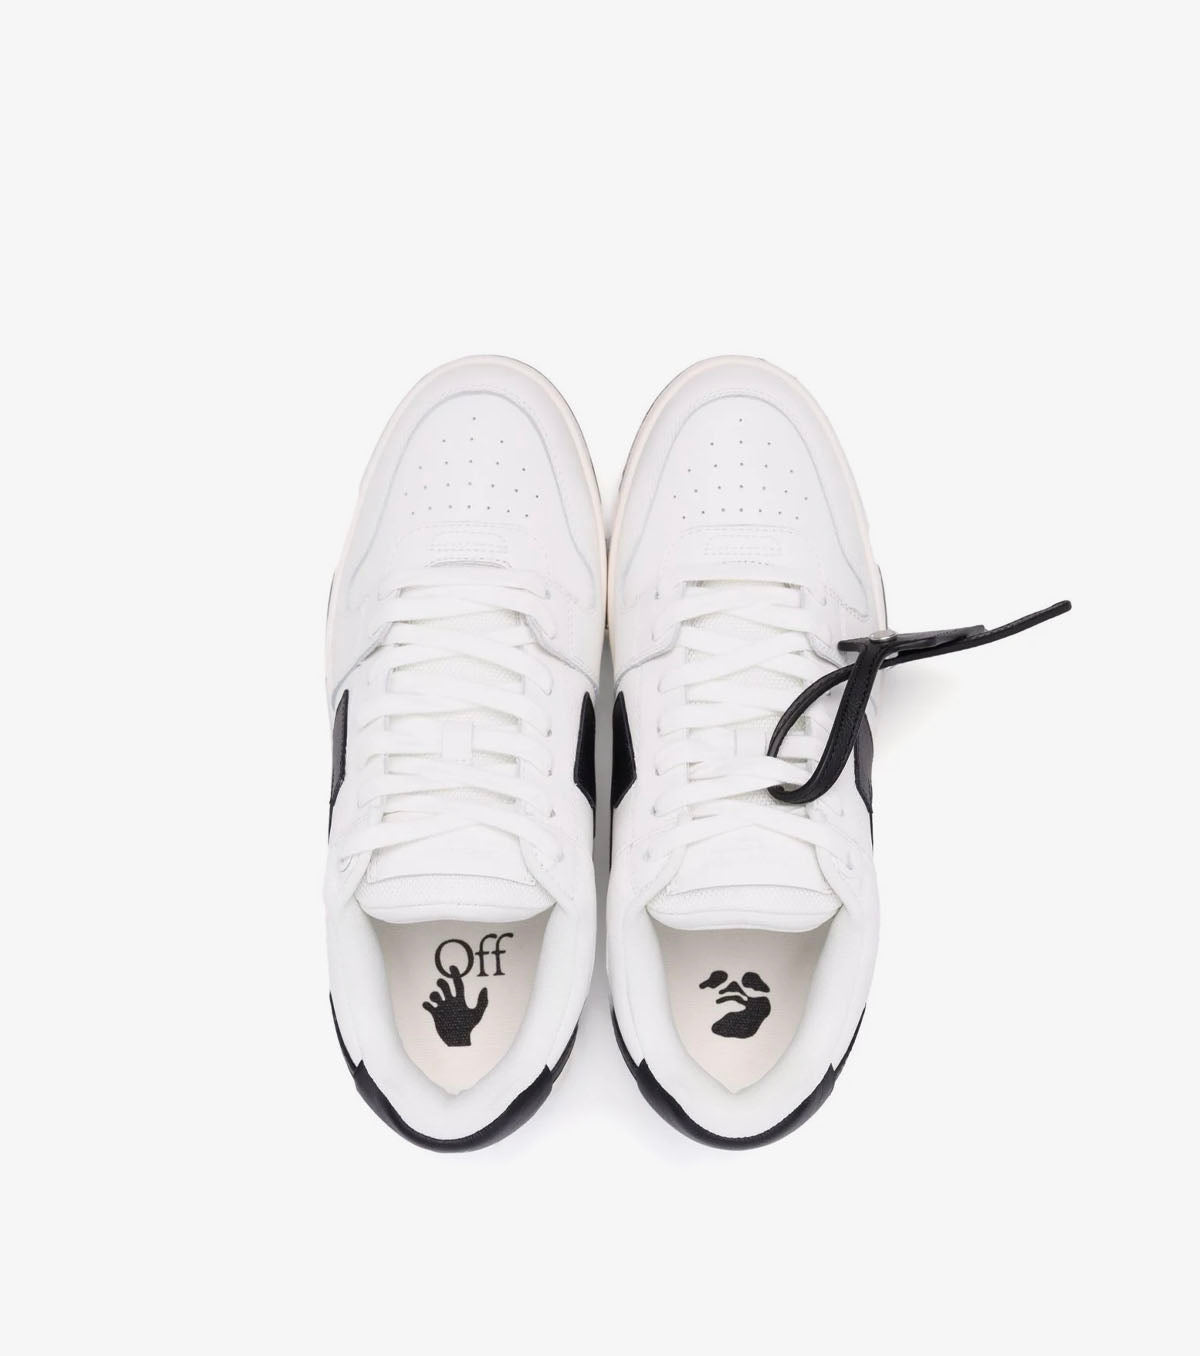 Out Of Office 'Ooo' sneakers - SNKRBASE